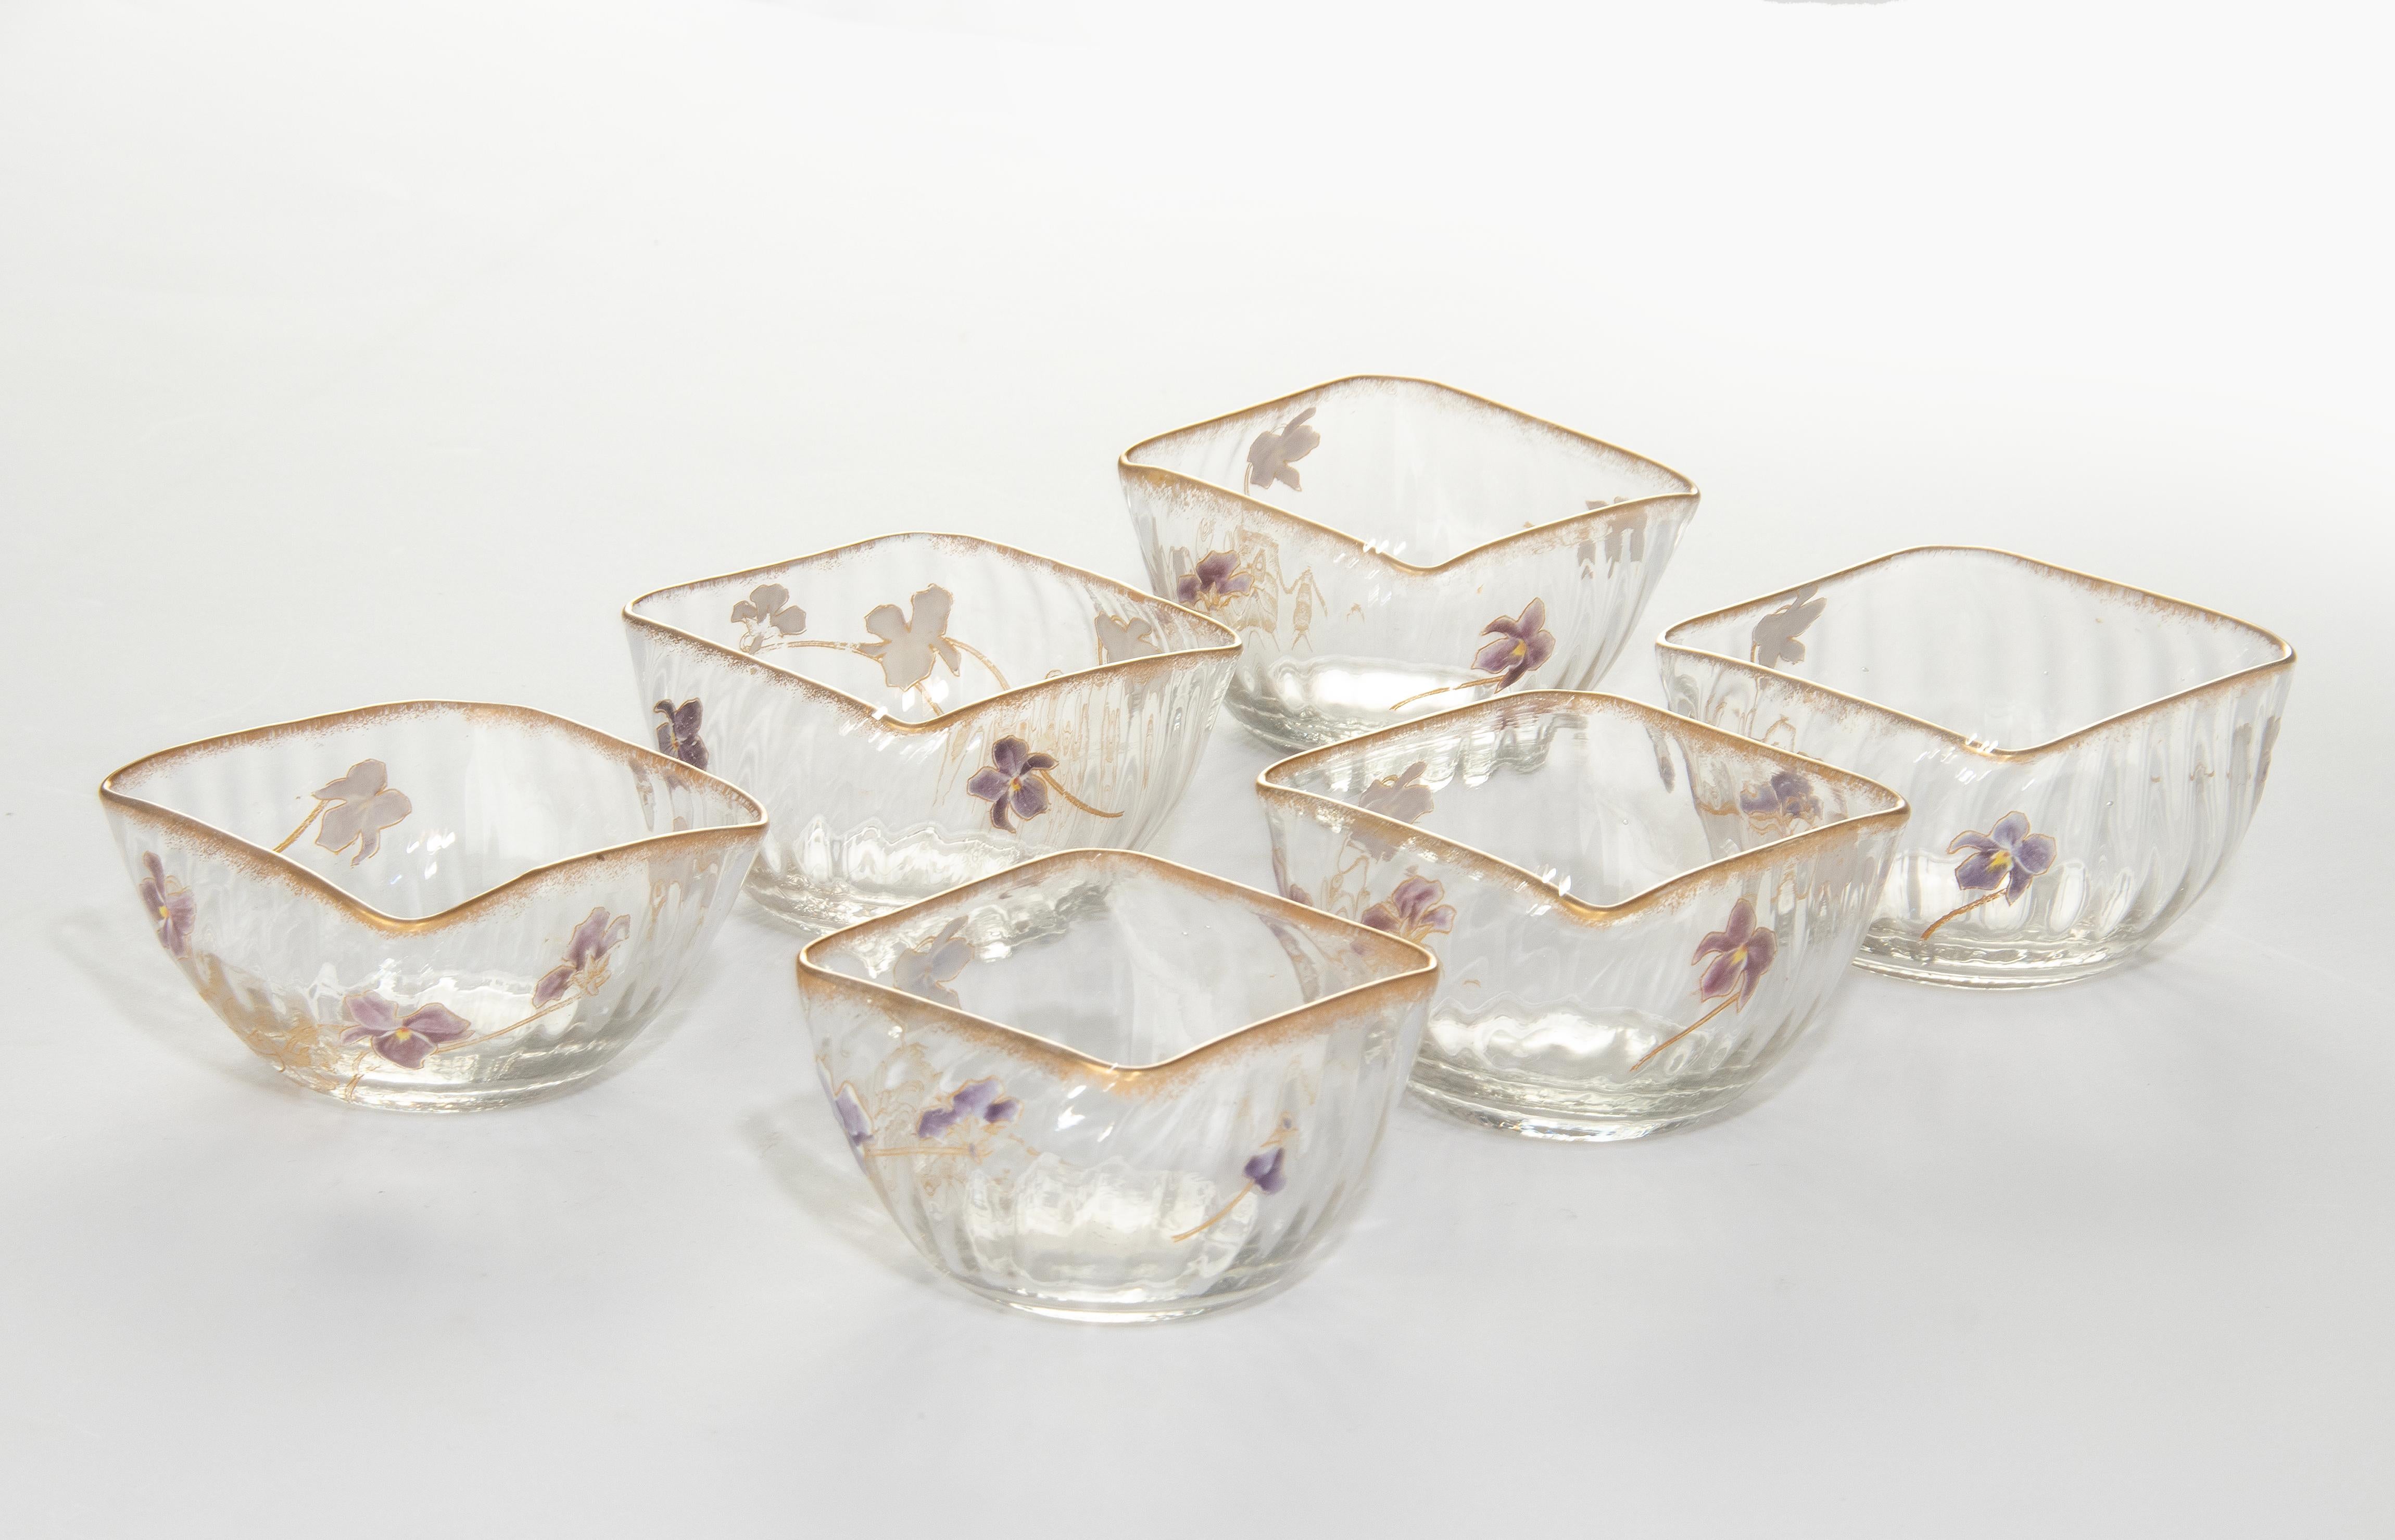 Set of 6 Crystal Art Nouveau Bowls Hand Painted with Flowers Attr. to Daum Nancy In Good Condition For Sale In Casteren, Noord-Brabant